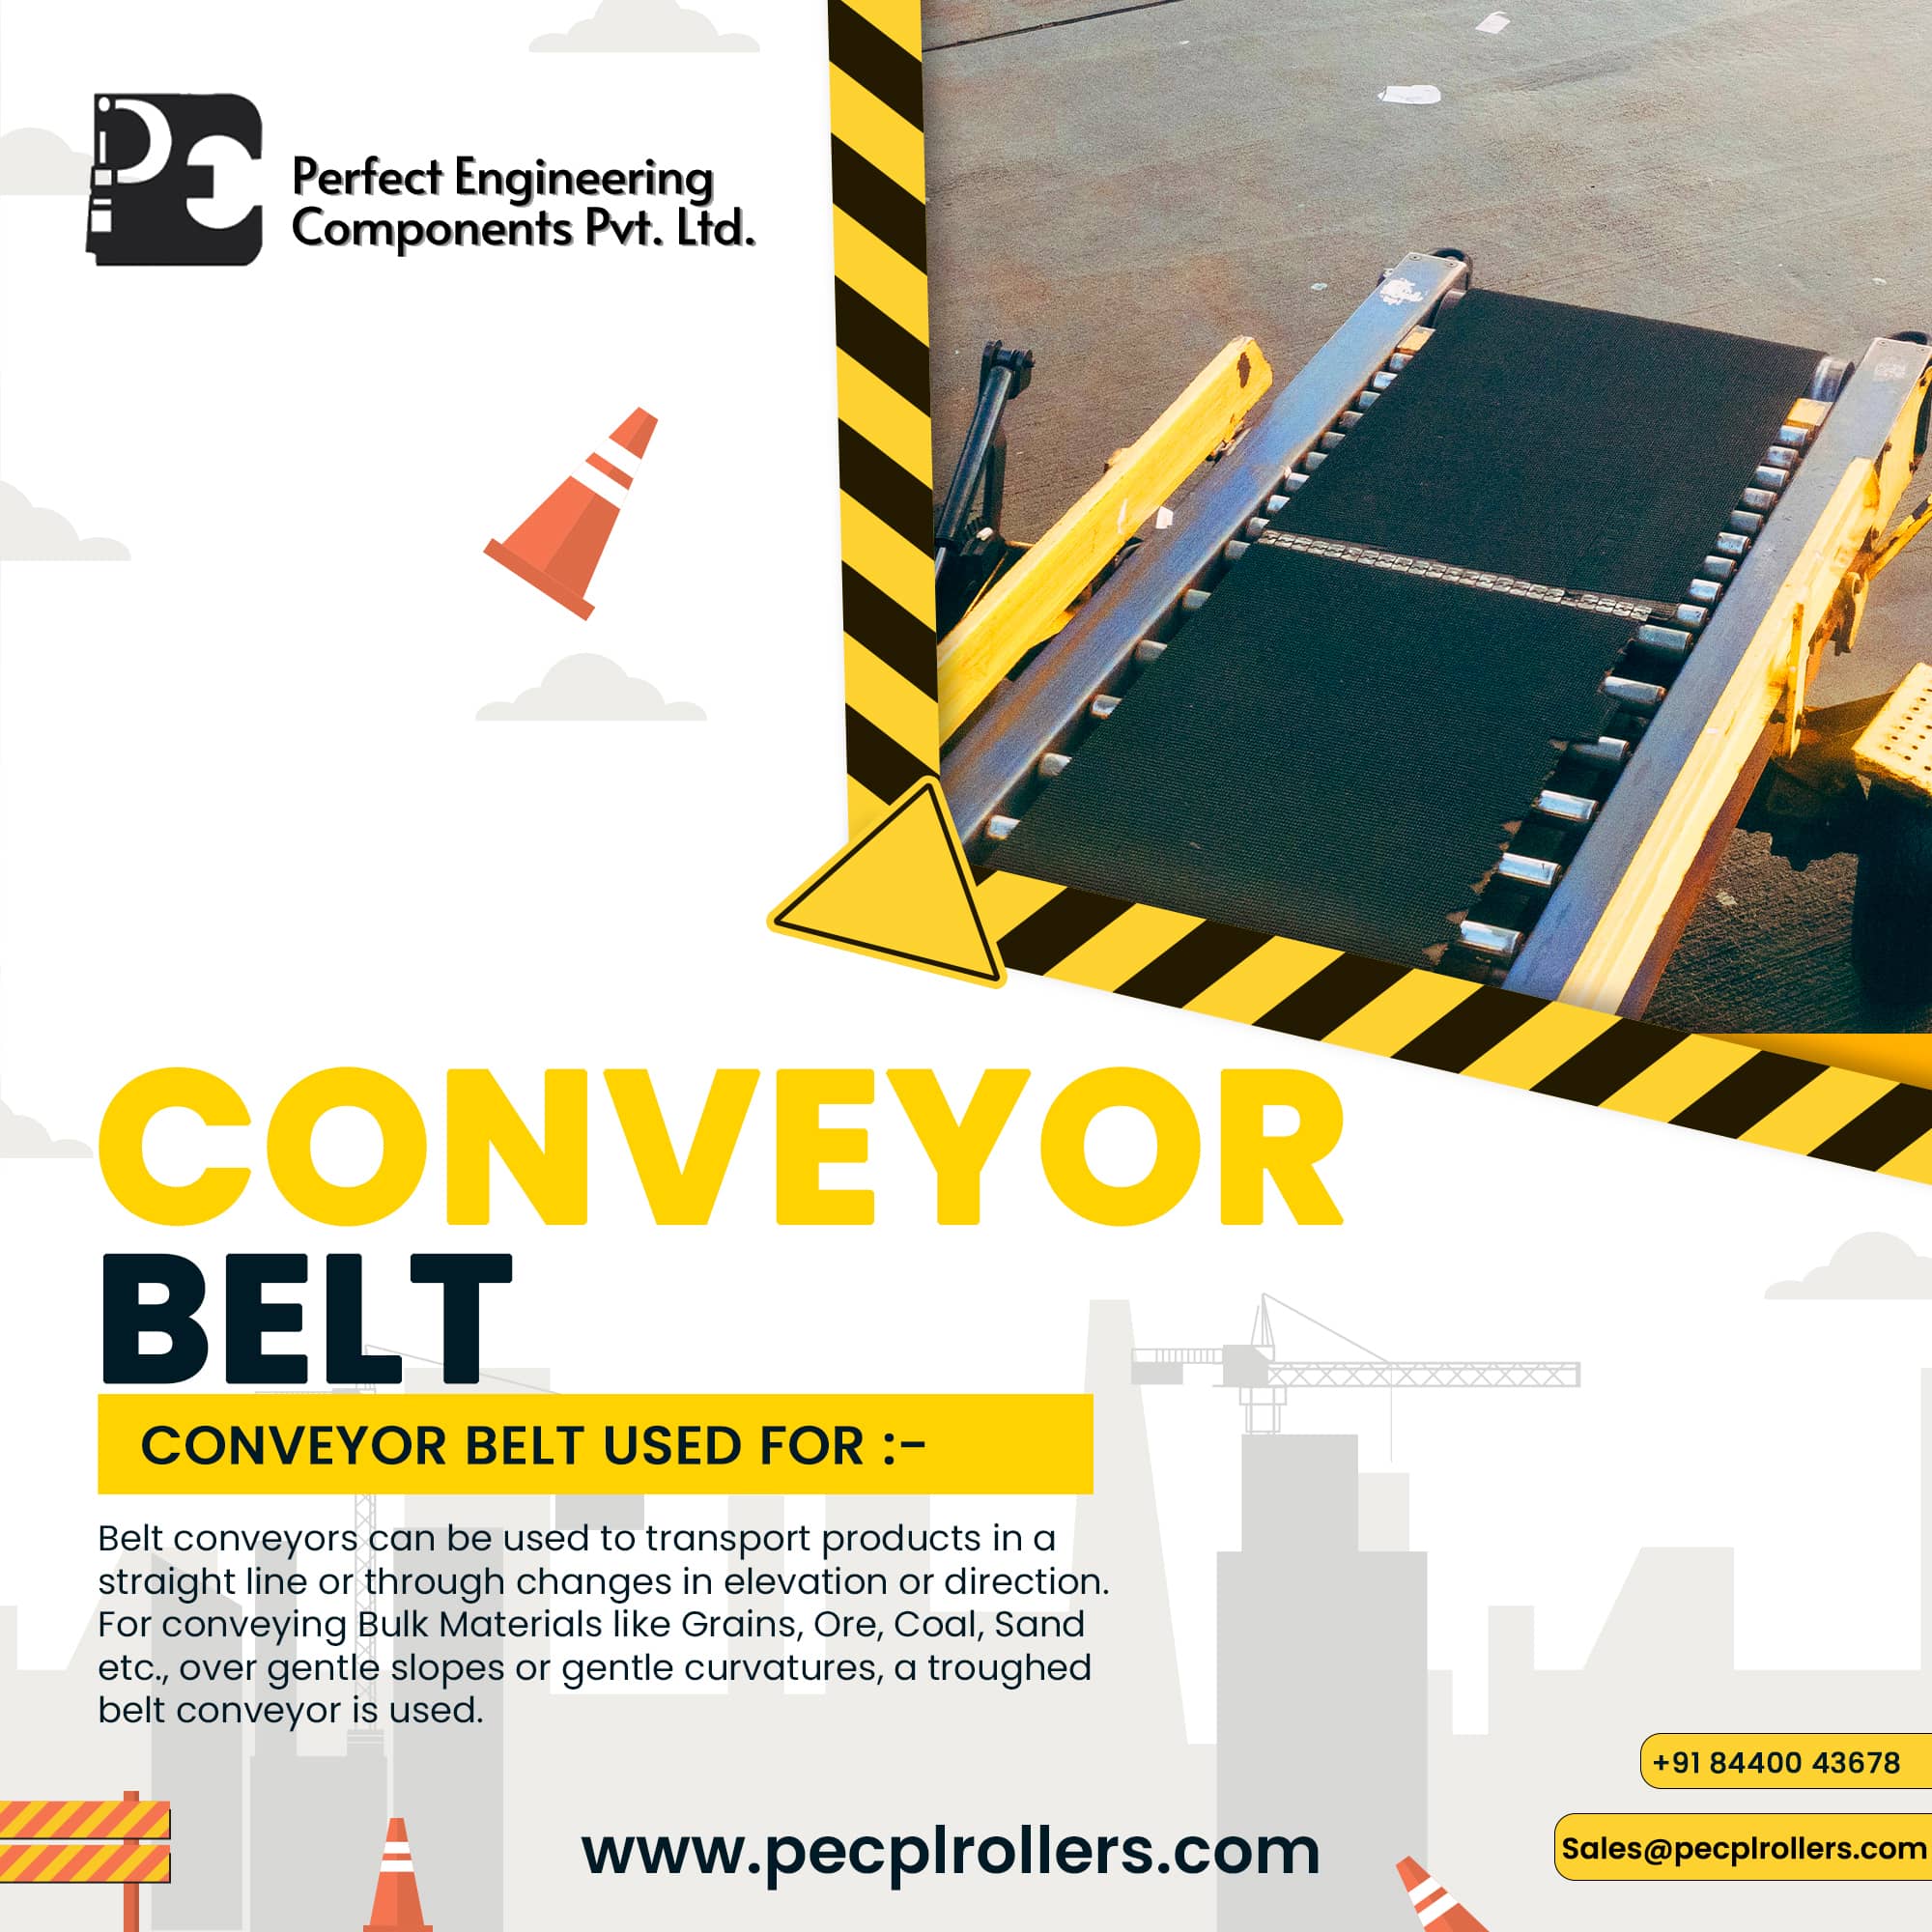 What is a conveyor belt used for?